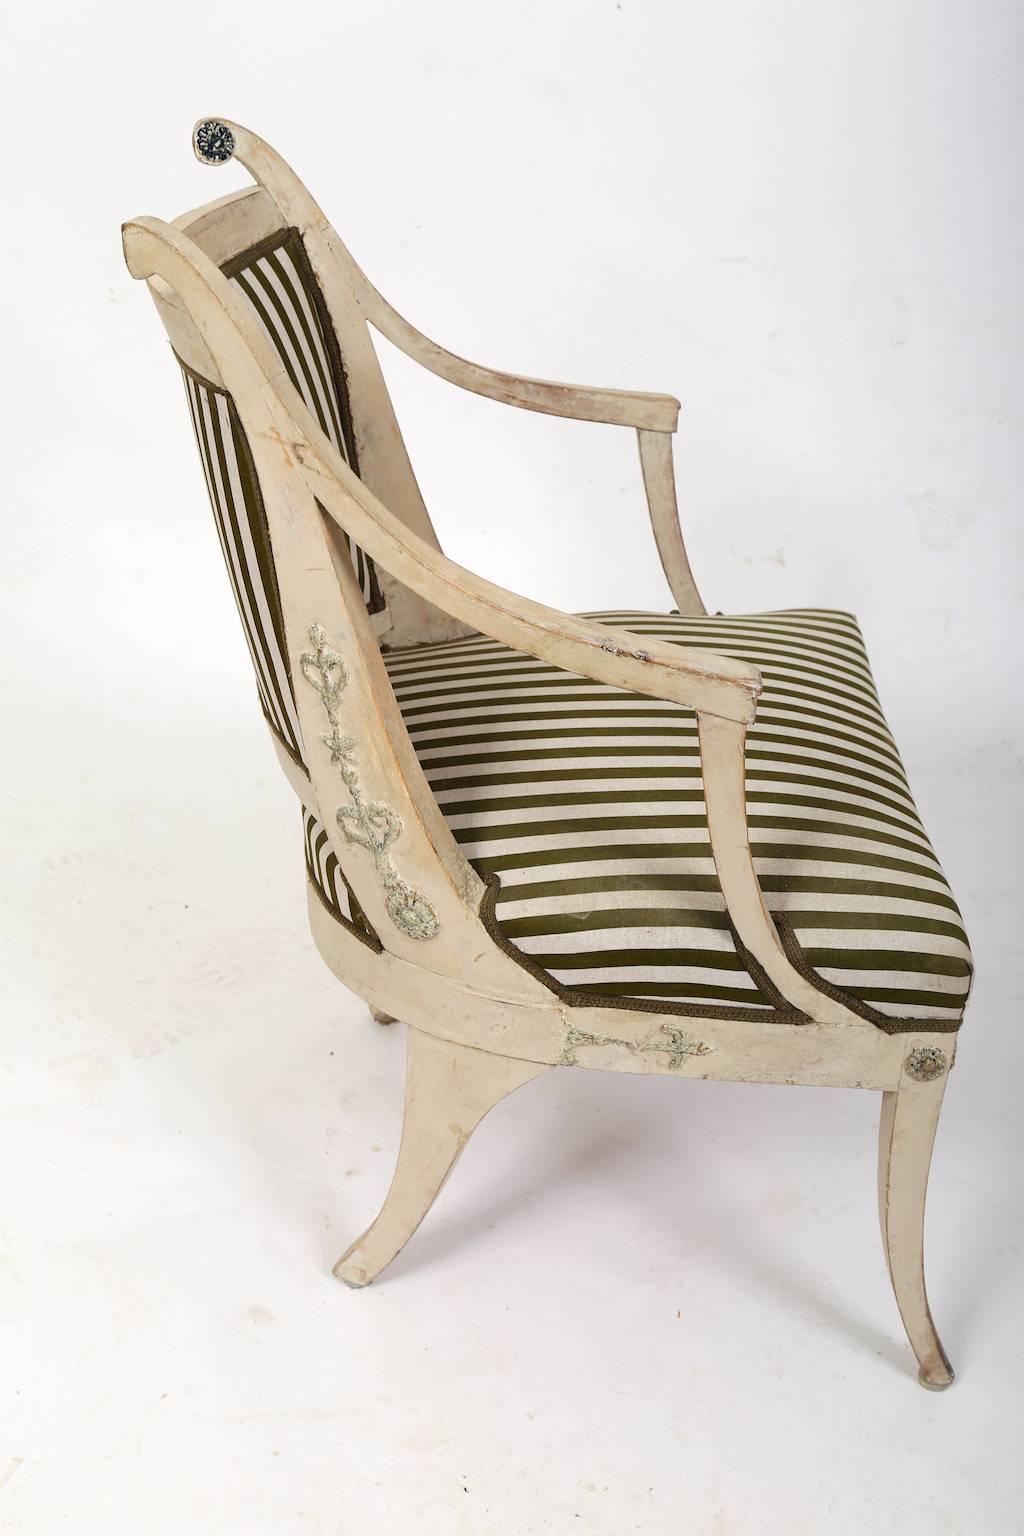 Armchair in the Style of the Royal Chairmaker Ephraim Ståhl, Sweden, 1815 For Sale 2